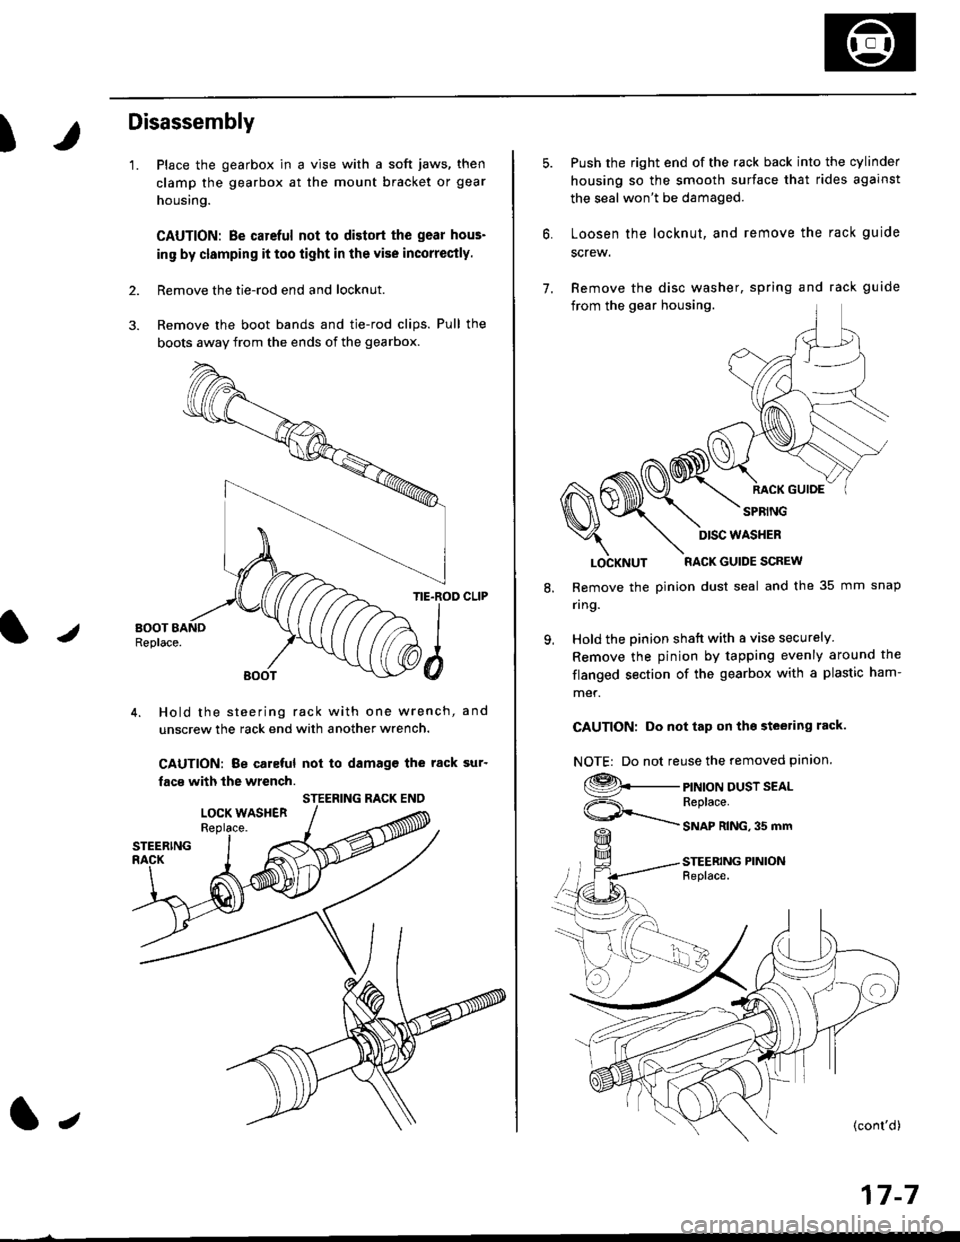 HONDA CIVIC 1998 6.G Workshop Manual )
Disassembly
1.
2.
Place the gearbox in a vise with a soft jaws, then
clamp the gearbox at the mount bracket or gear
housing.
CAUTION: Be carcful not to distort the gear hous-
in9 by clamping it too